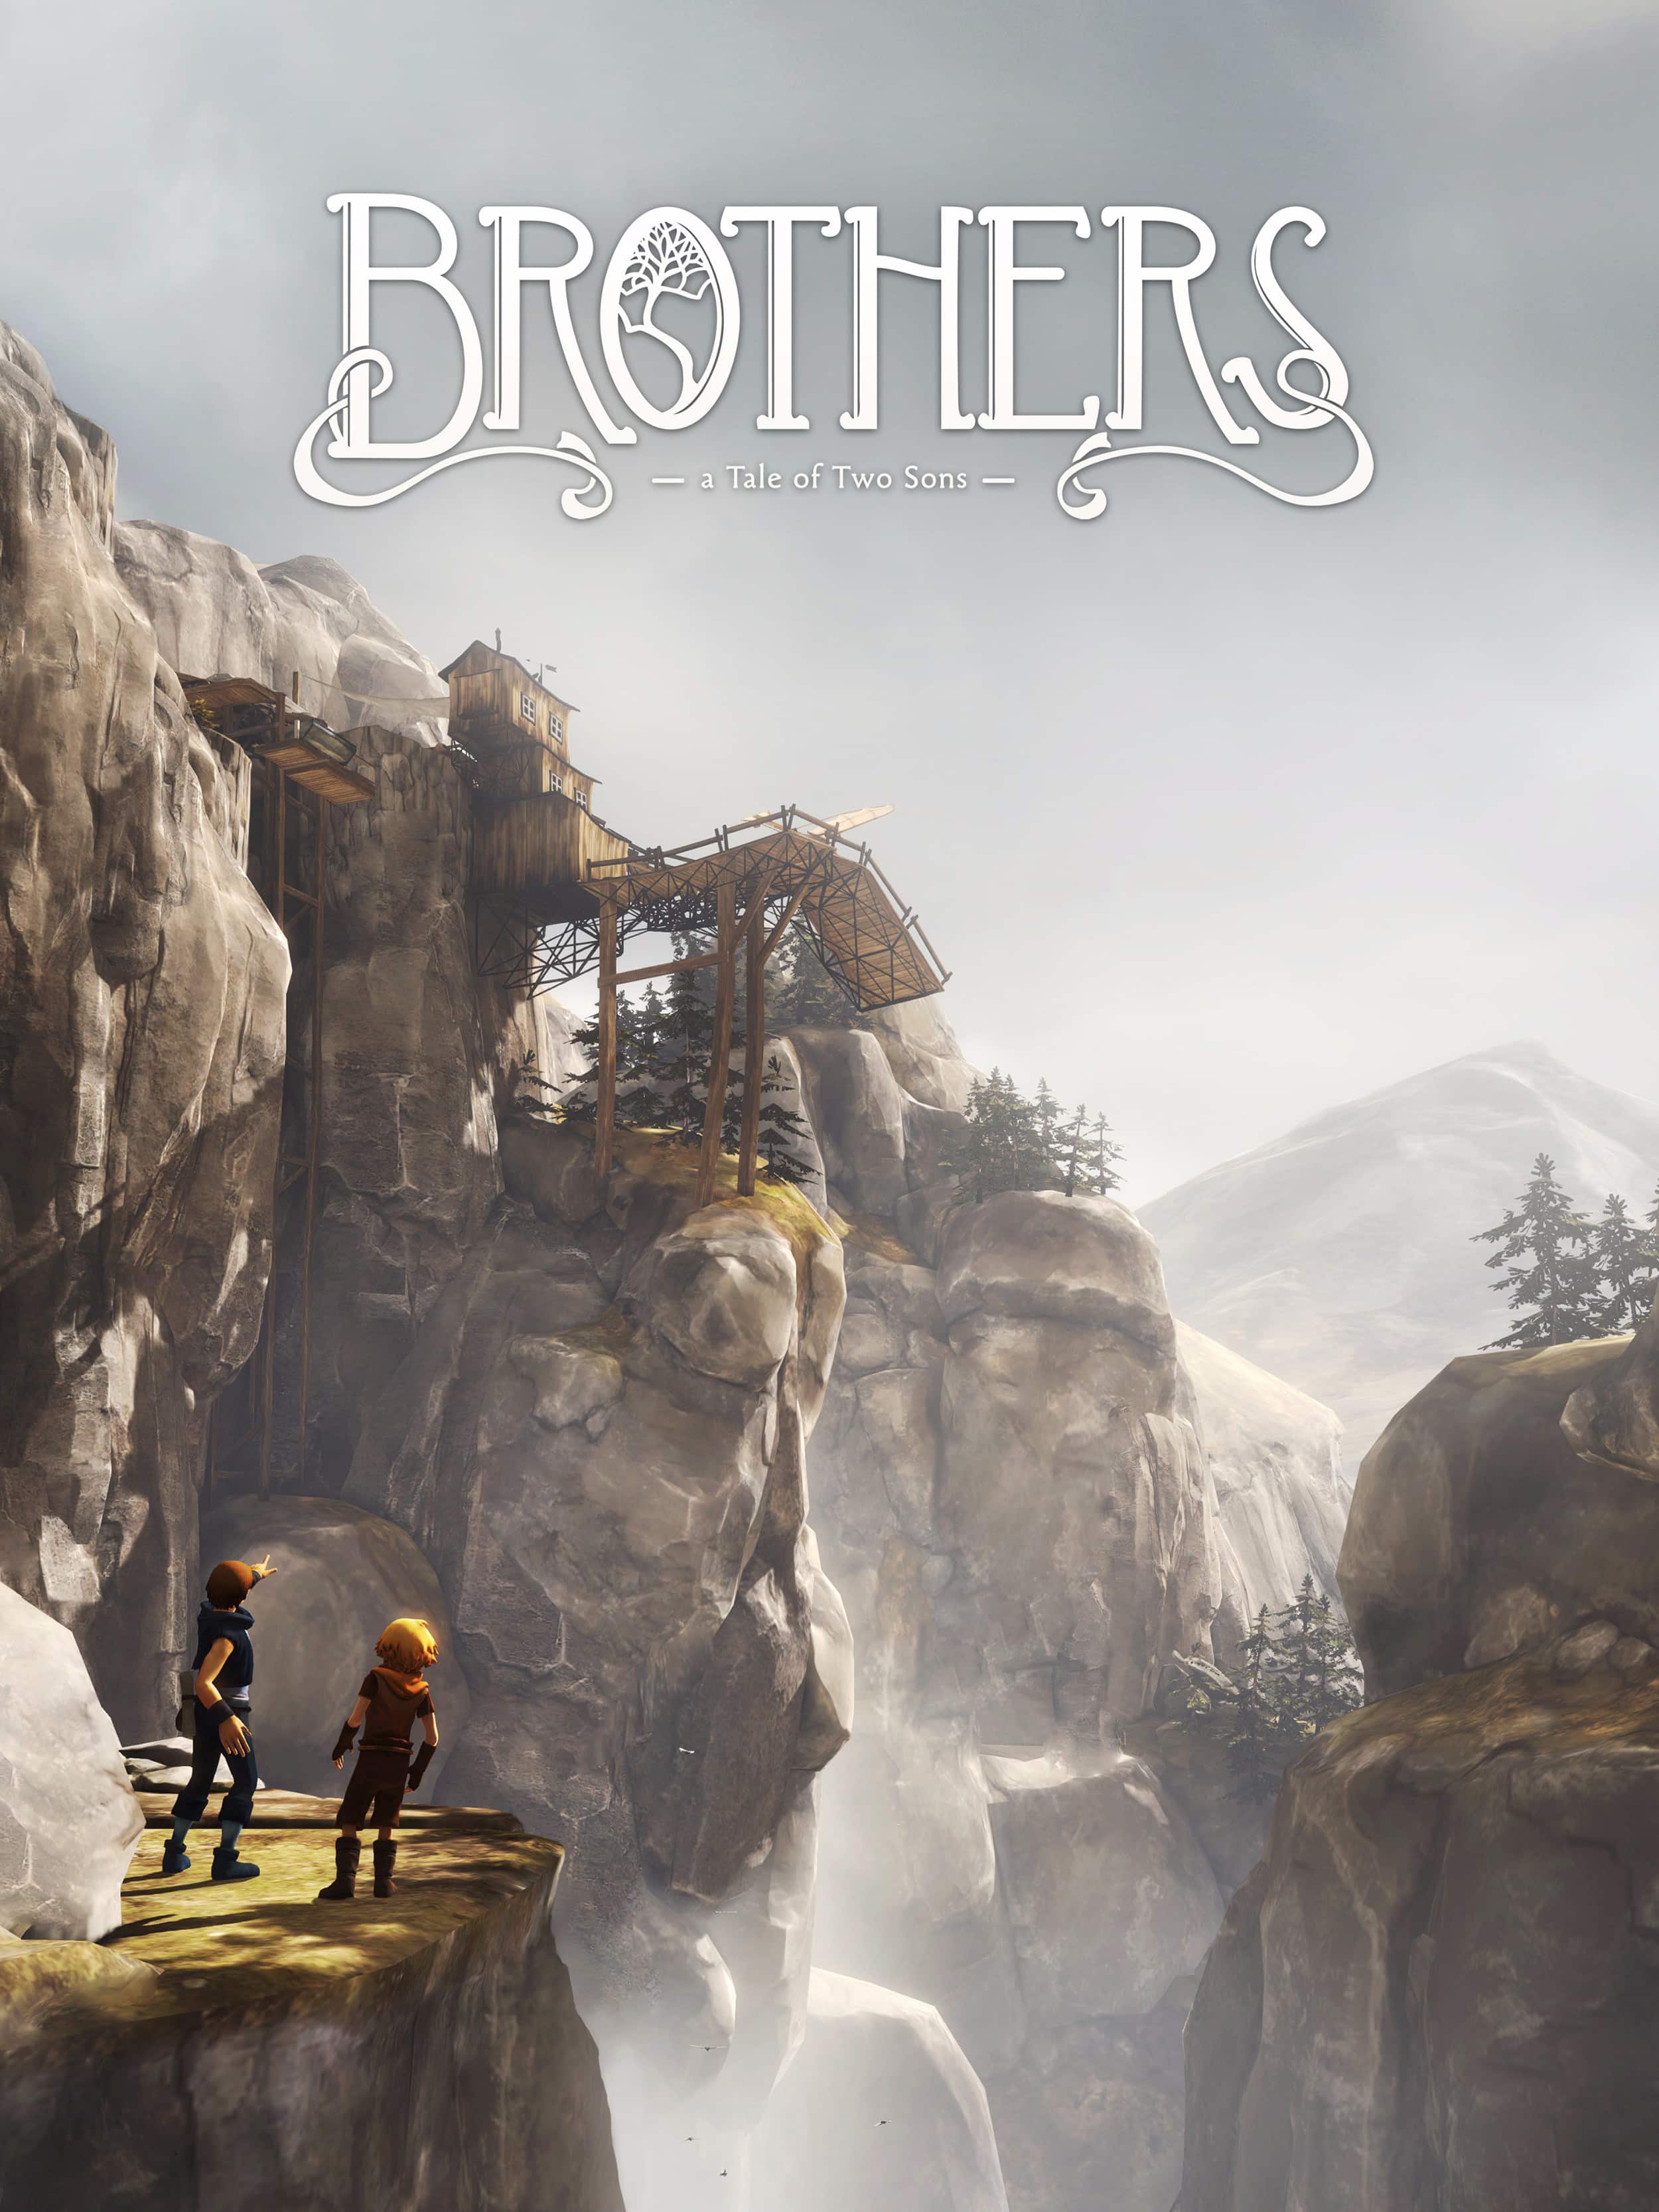 Игра brothers a Tale of two sons. Brothers: a Tale of two sons обложка. Brothers Tale ps4. Brothers a Tale of two sons ps4.